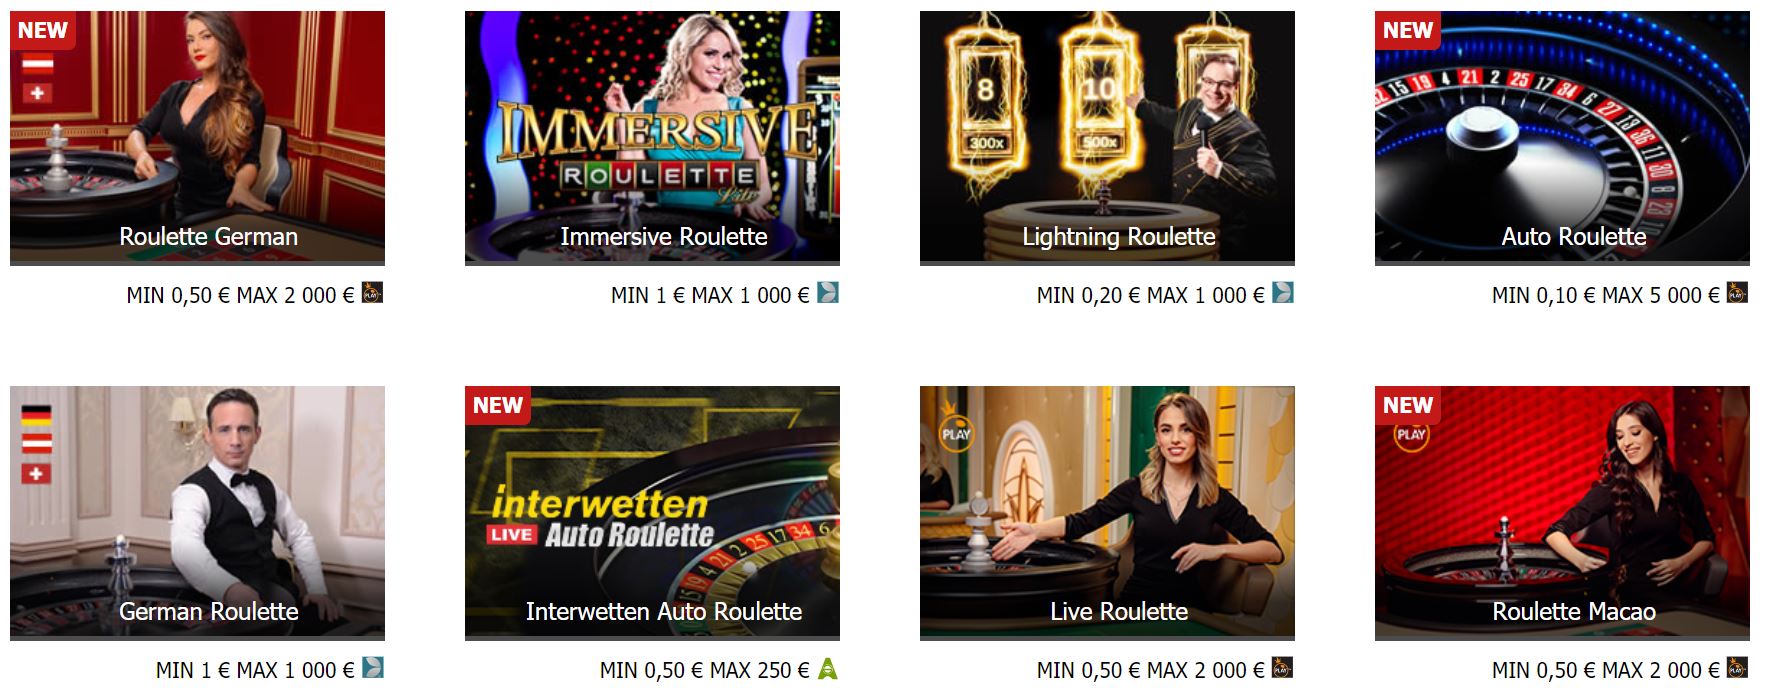 You can consult all the roulette strategies on this website.